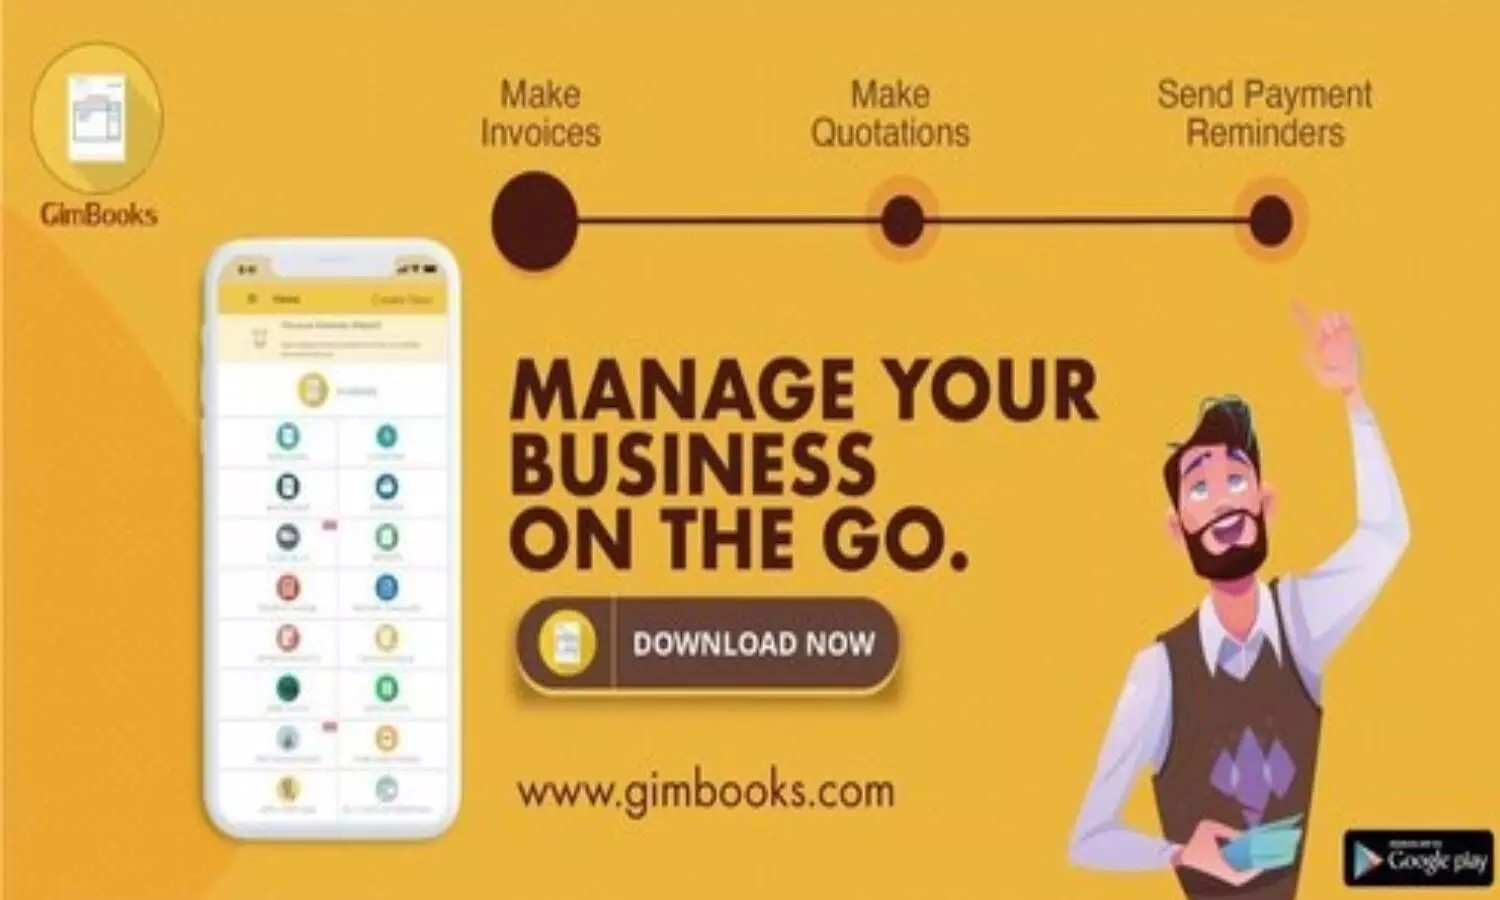 GimBooks raises seed funding from First Check Ventures, Y Combinator